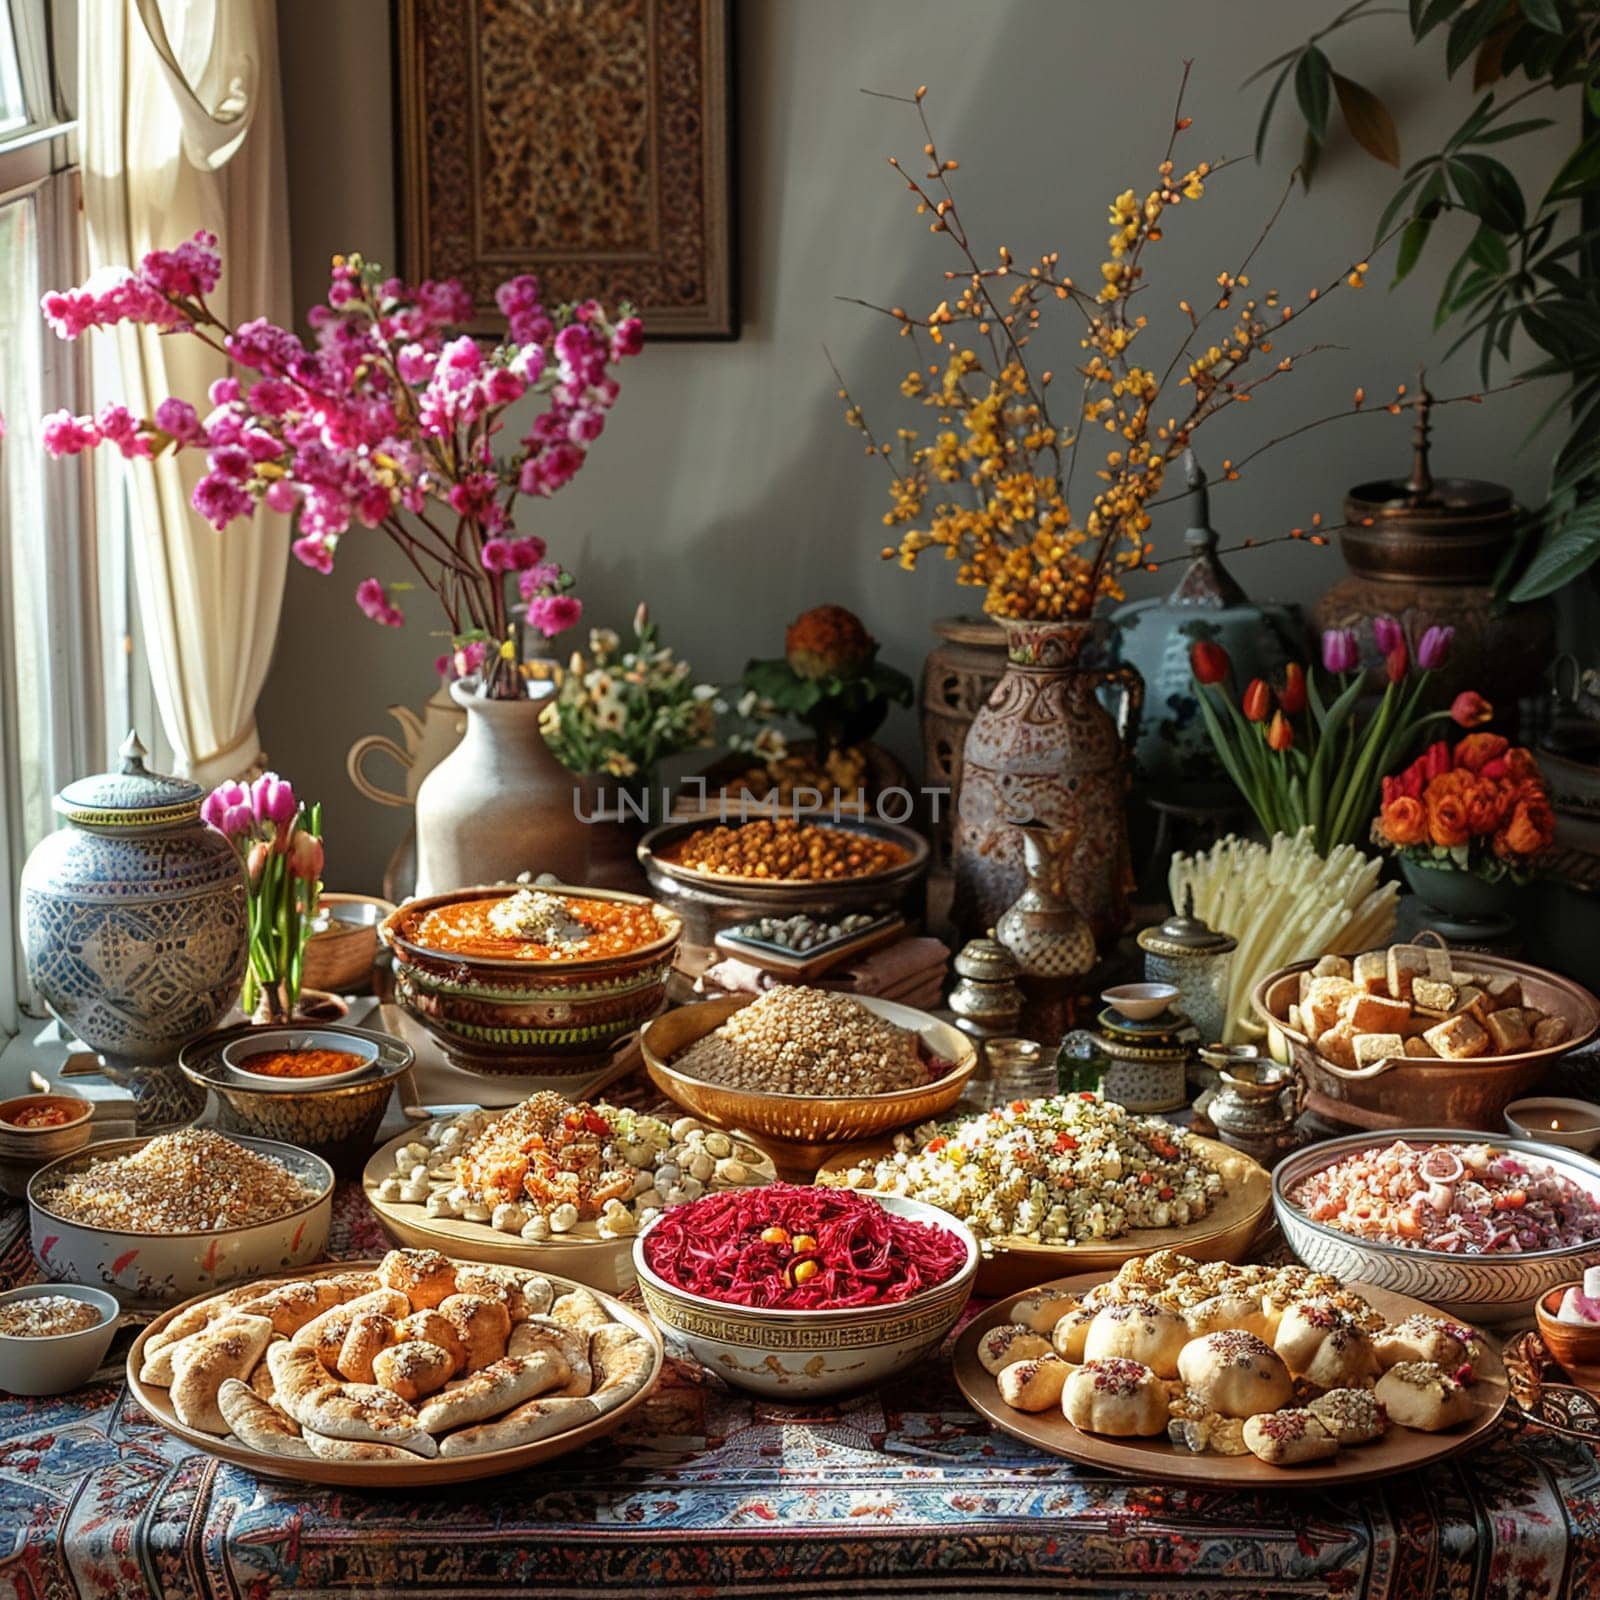 Meticulously arranged Nowruz haft-seen table, complete with all seven items.